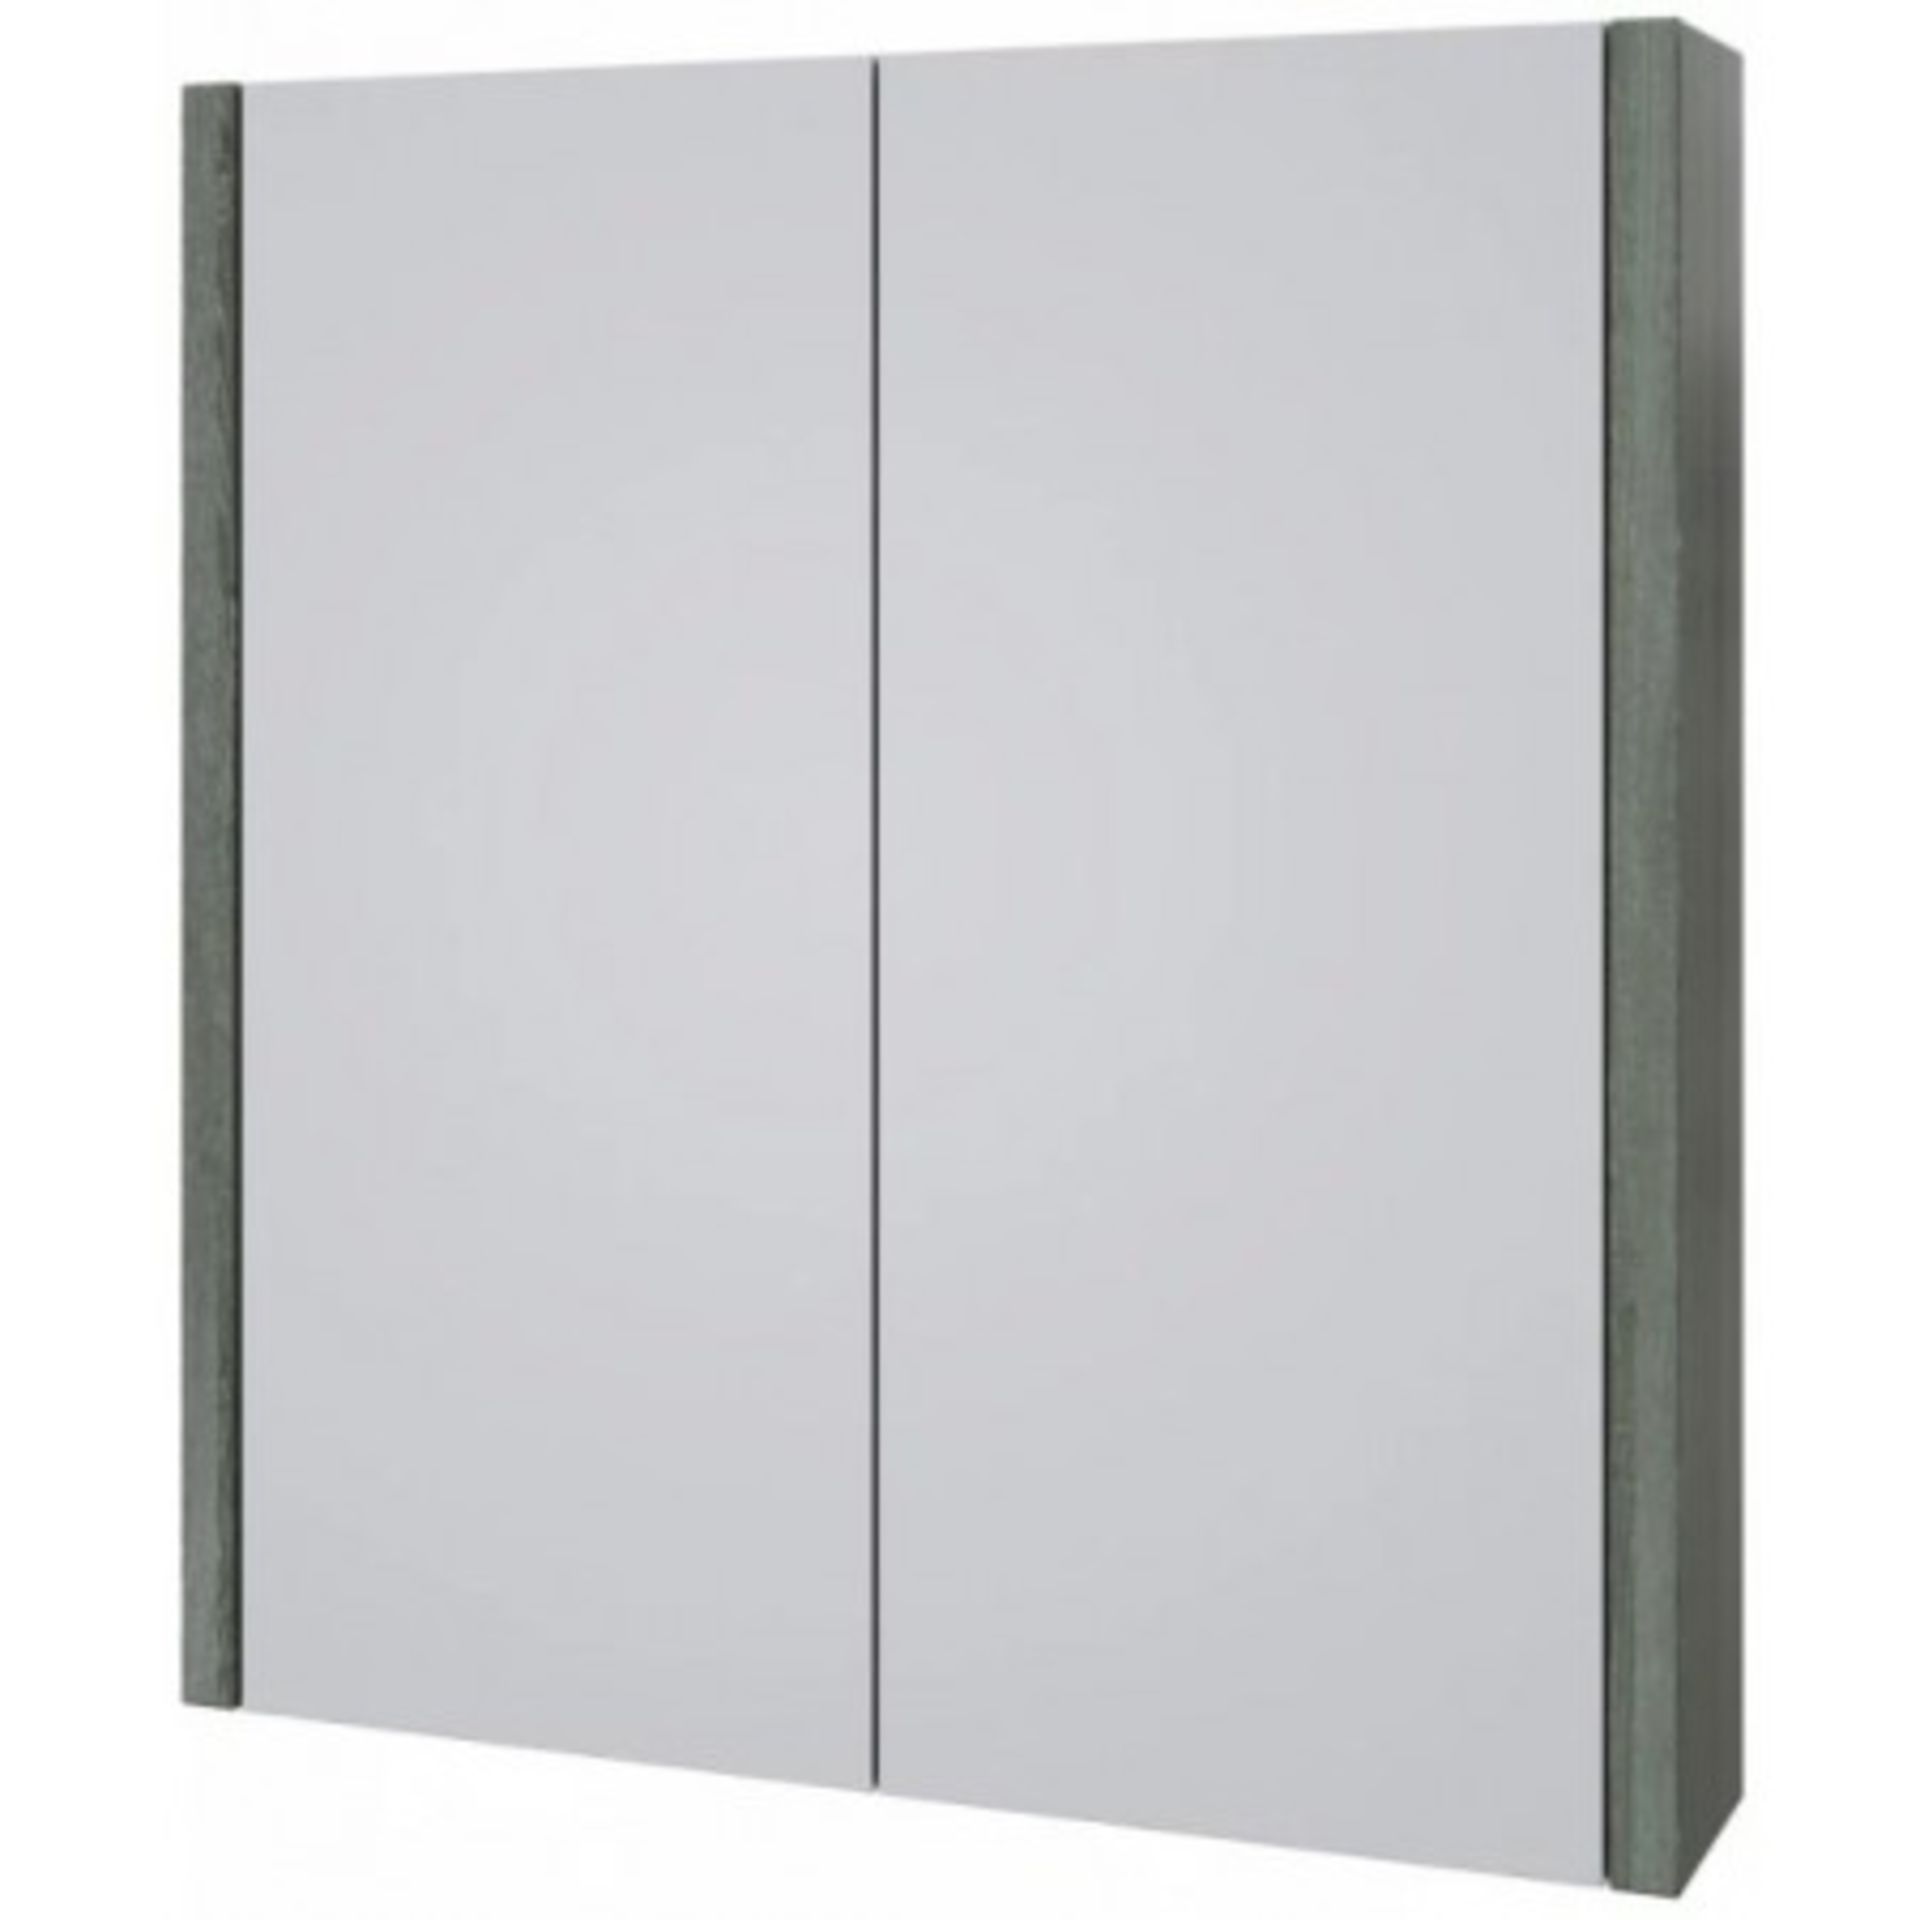 New (ZZ21) Benita Grey Ash Mirrored Cabinet 600mm. RRP £295.00. 2 Door Manufactured from MFC - Image 2 of 2